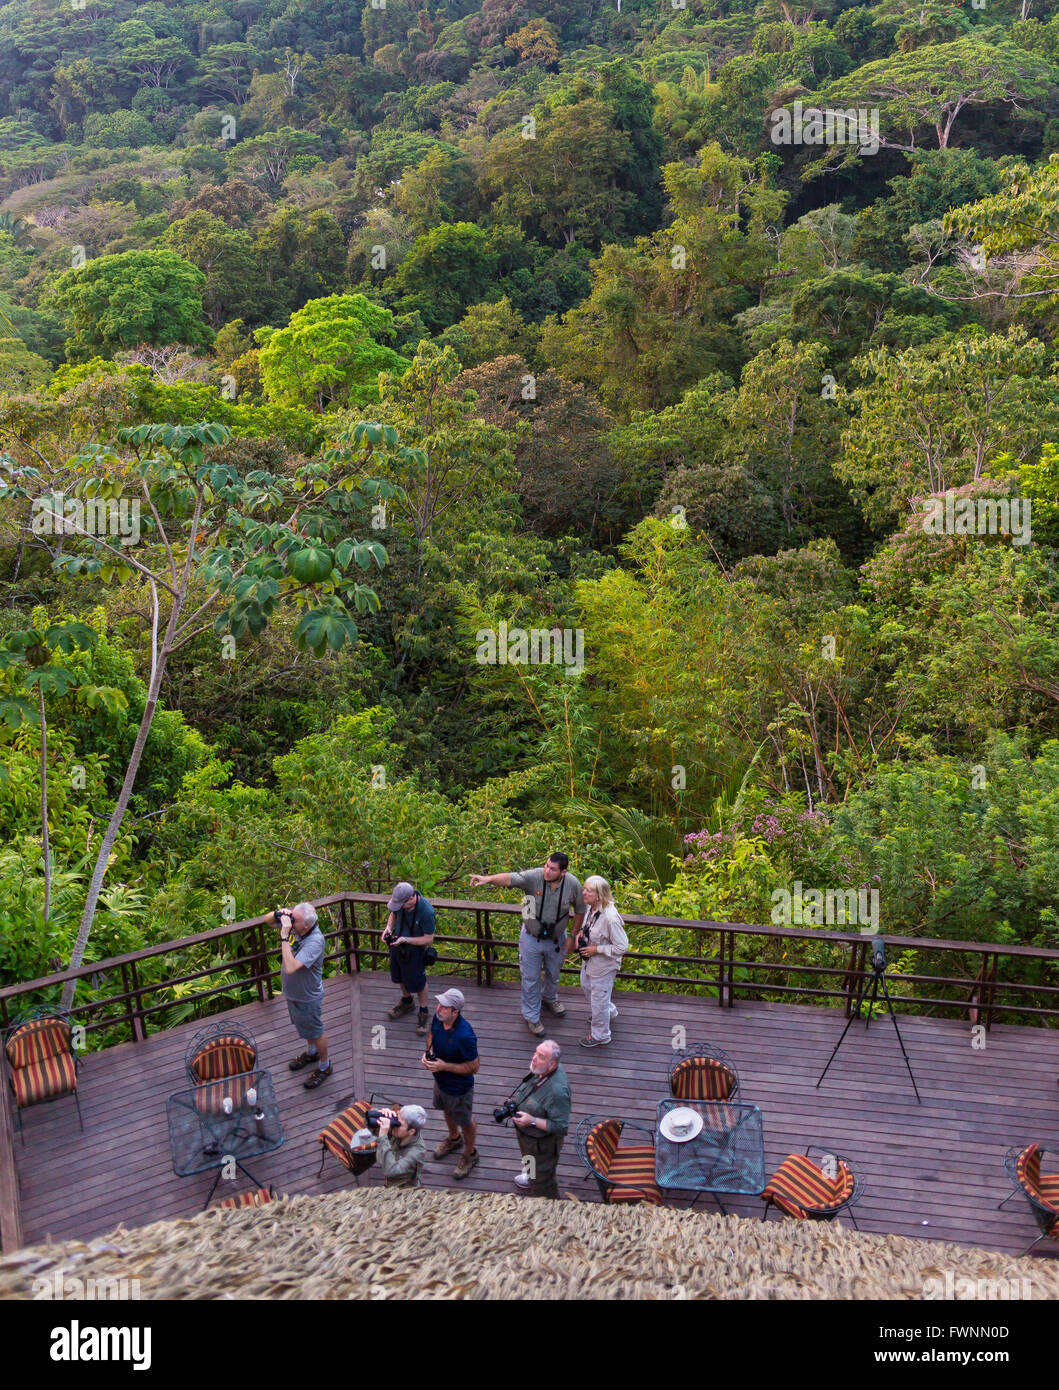 OSA PENINSULA, COSTA RICA - Eco-tourists viewing wildlife from deck in rain forest. Stock Photo